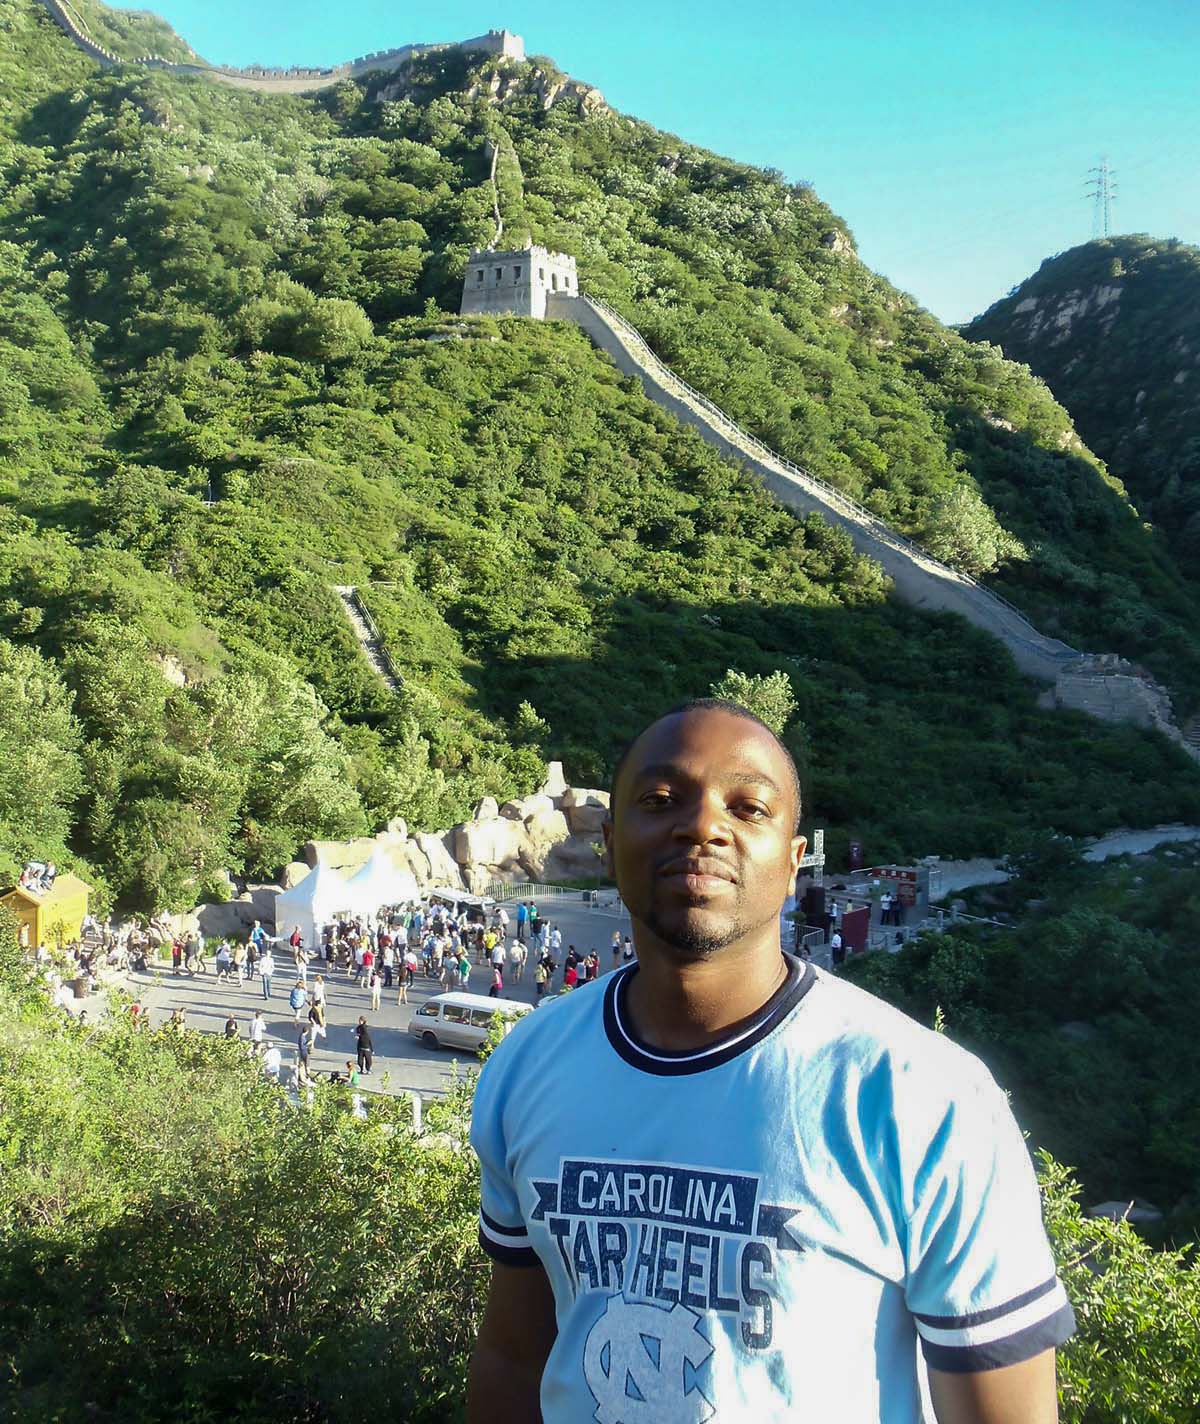 Dedren Snead standing in front of the Great Wall of China.